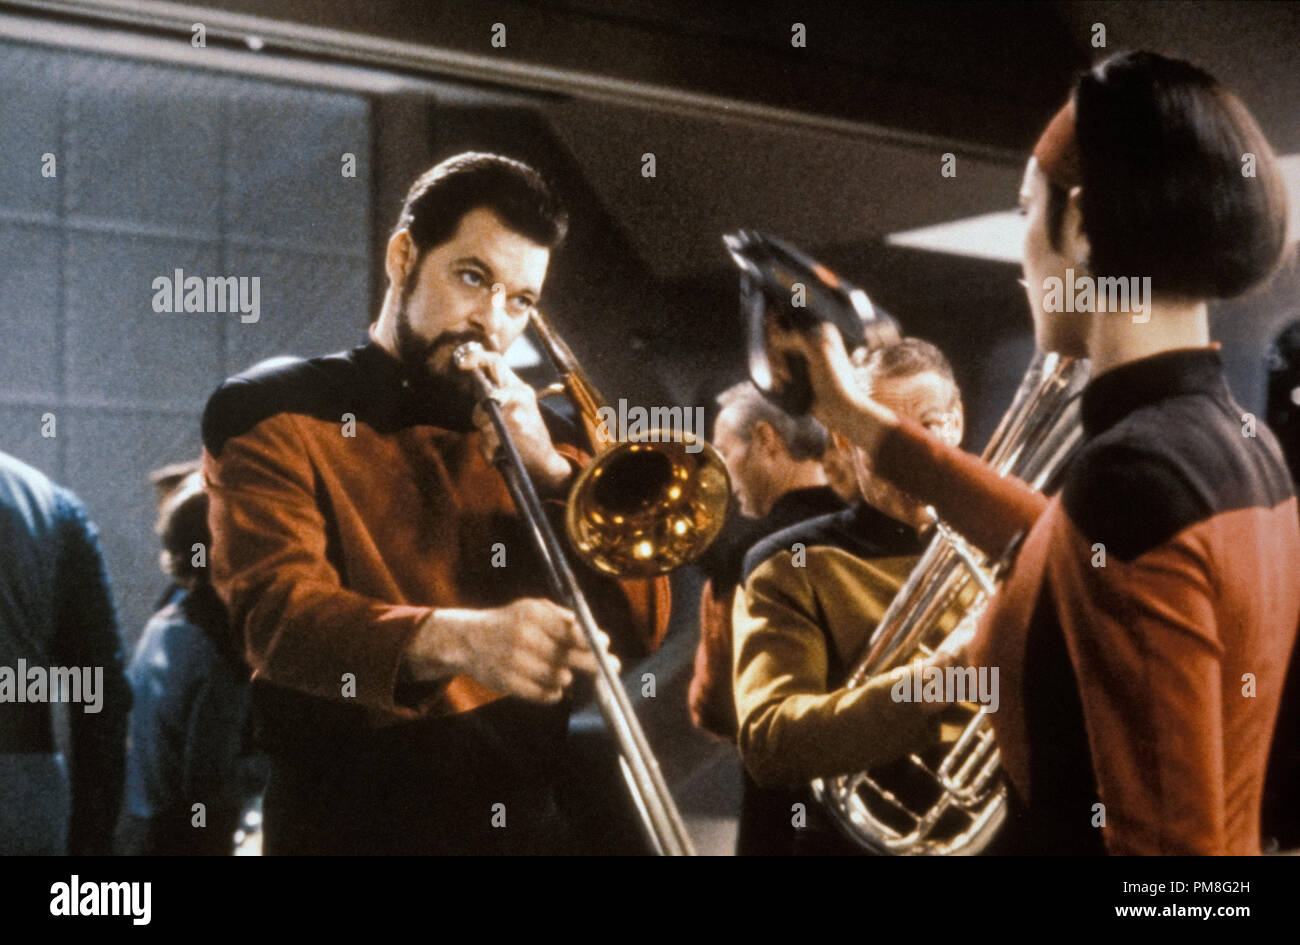 Film still / publicity still from 'Star Trek: The Next Generation' Jonathan Frakes 1993   File Reference # 31371124THA  For Editorial Use Only All Rights Reserved Stock Photo